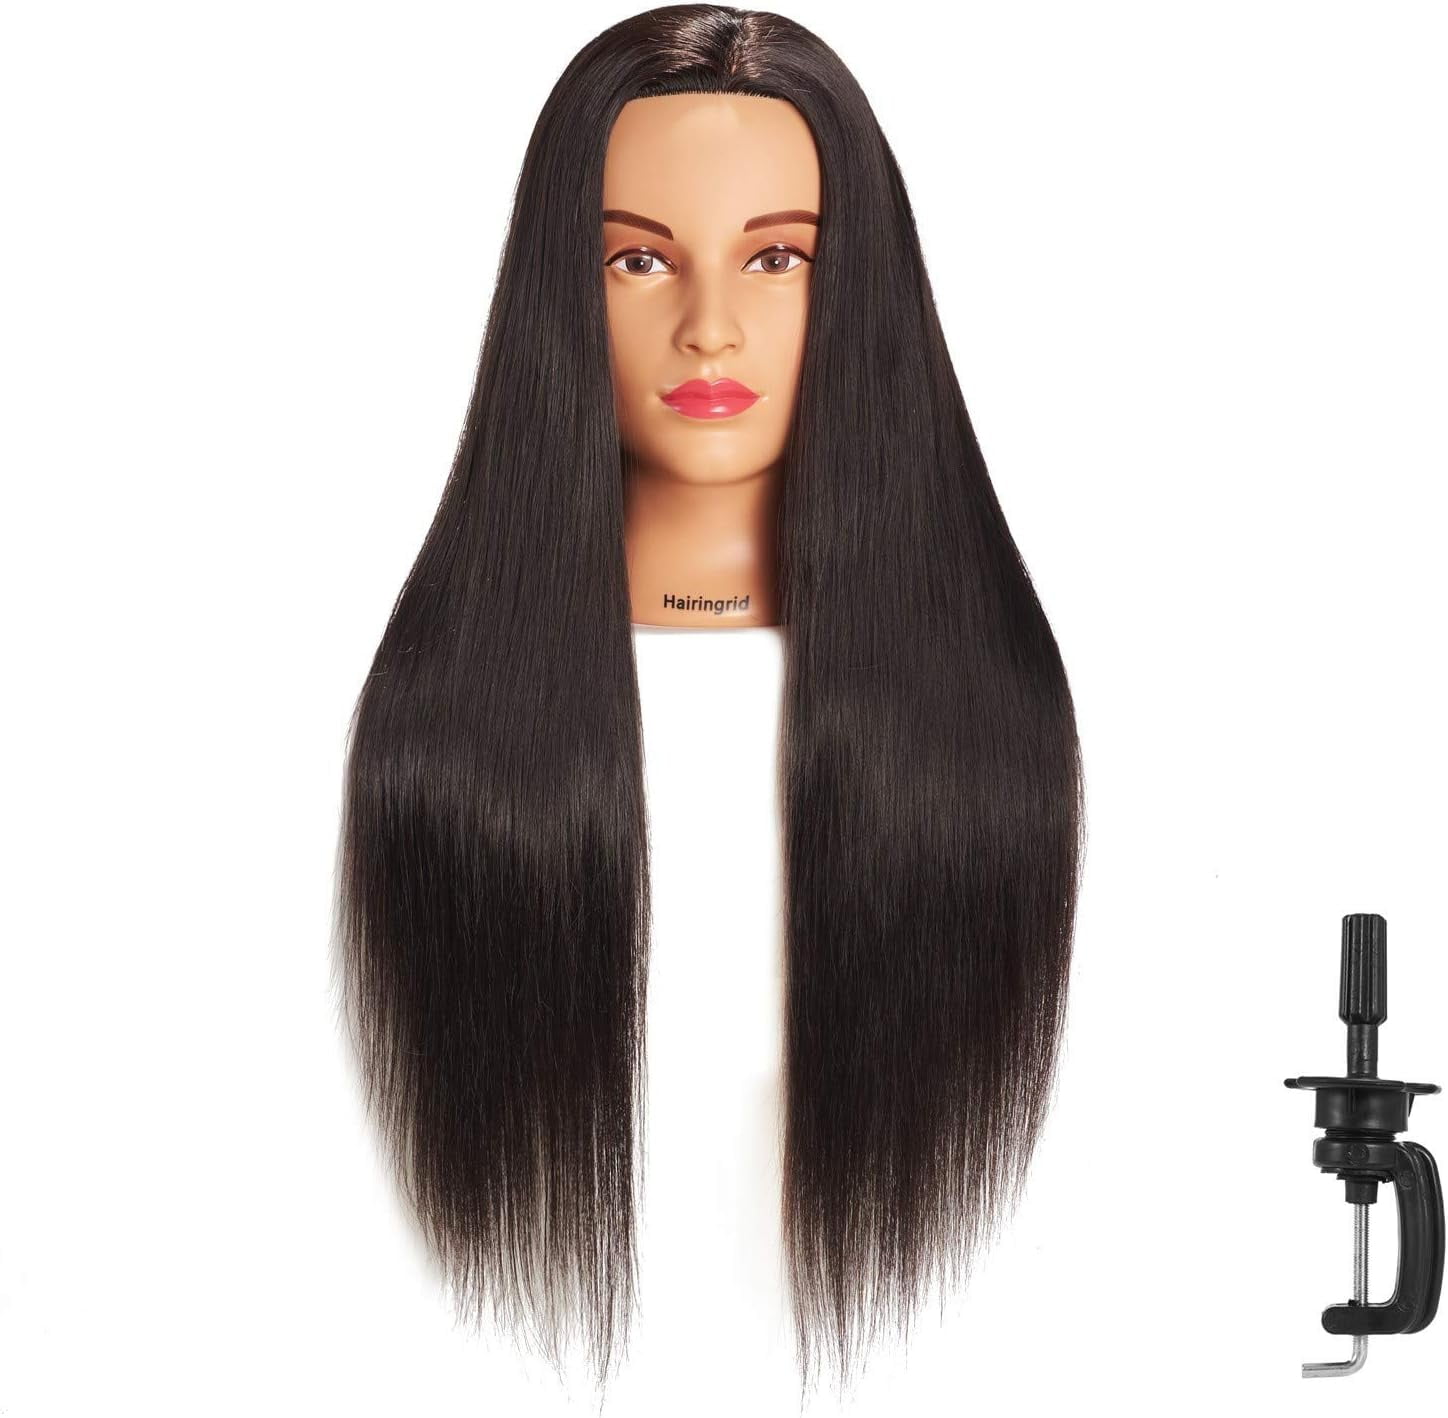 18'' Mannequin Head Remy Human Hair Styling Training Head Dolls Practice  w/Stand